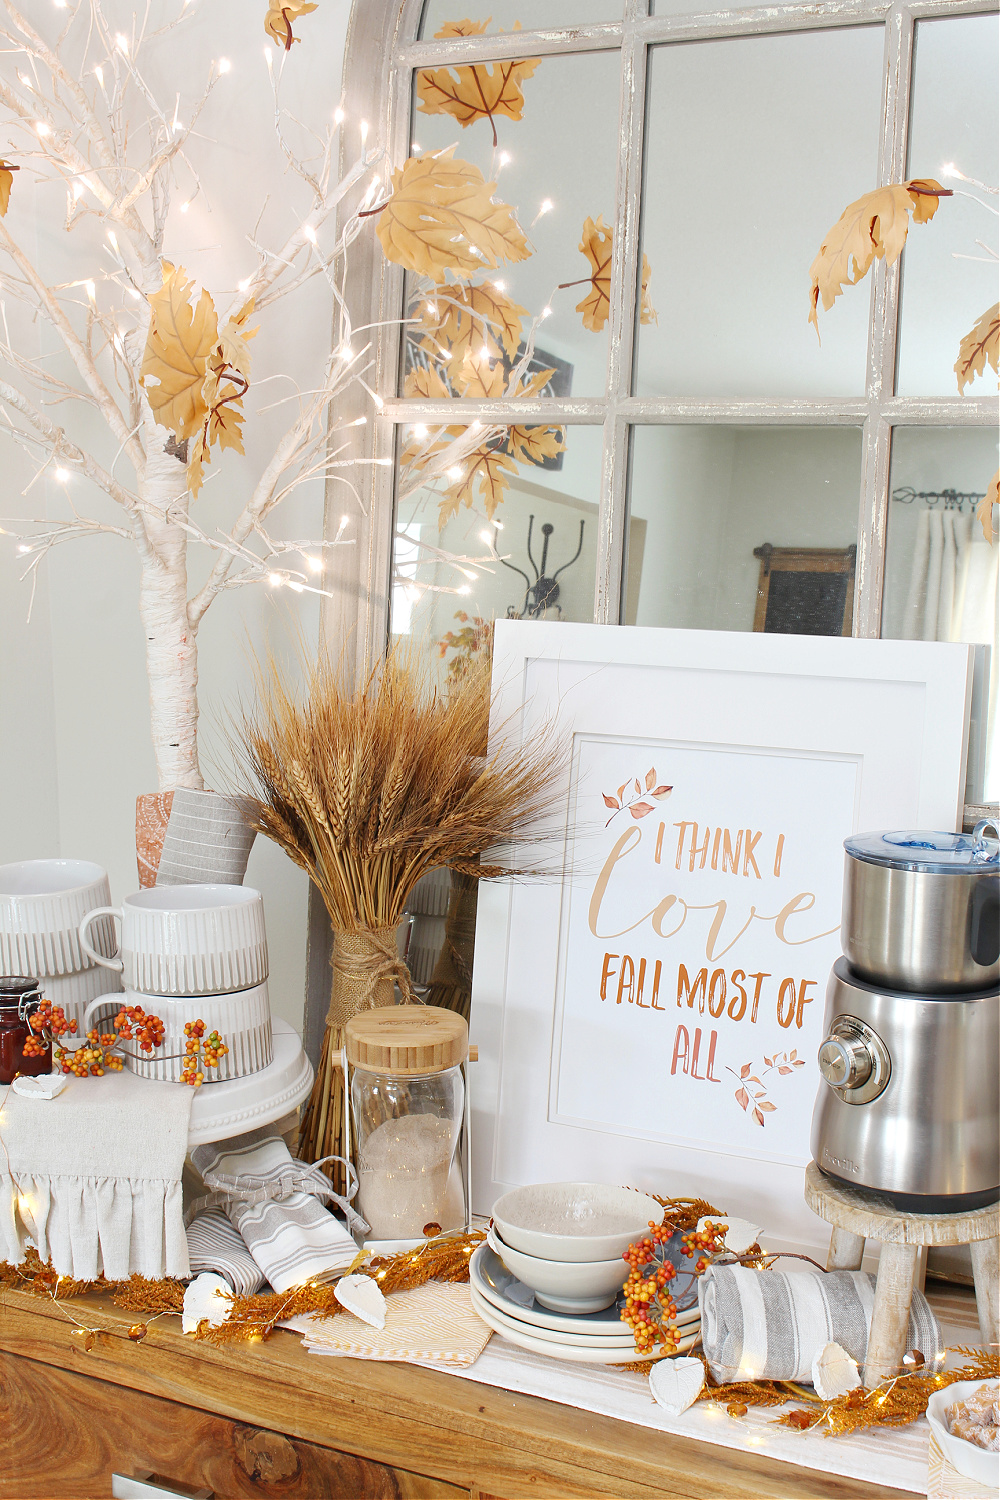 I Think I Love Fall Most of All free printable displayed on a coffee bar.